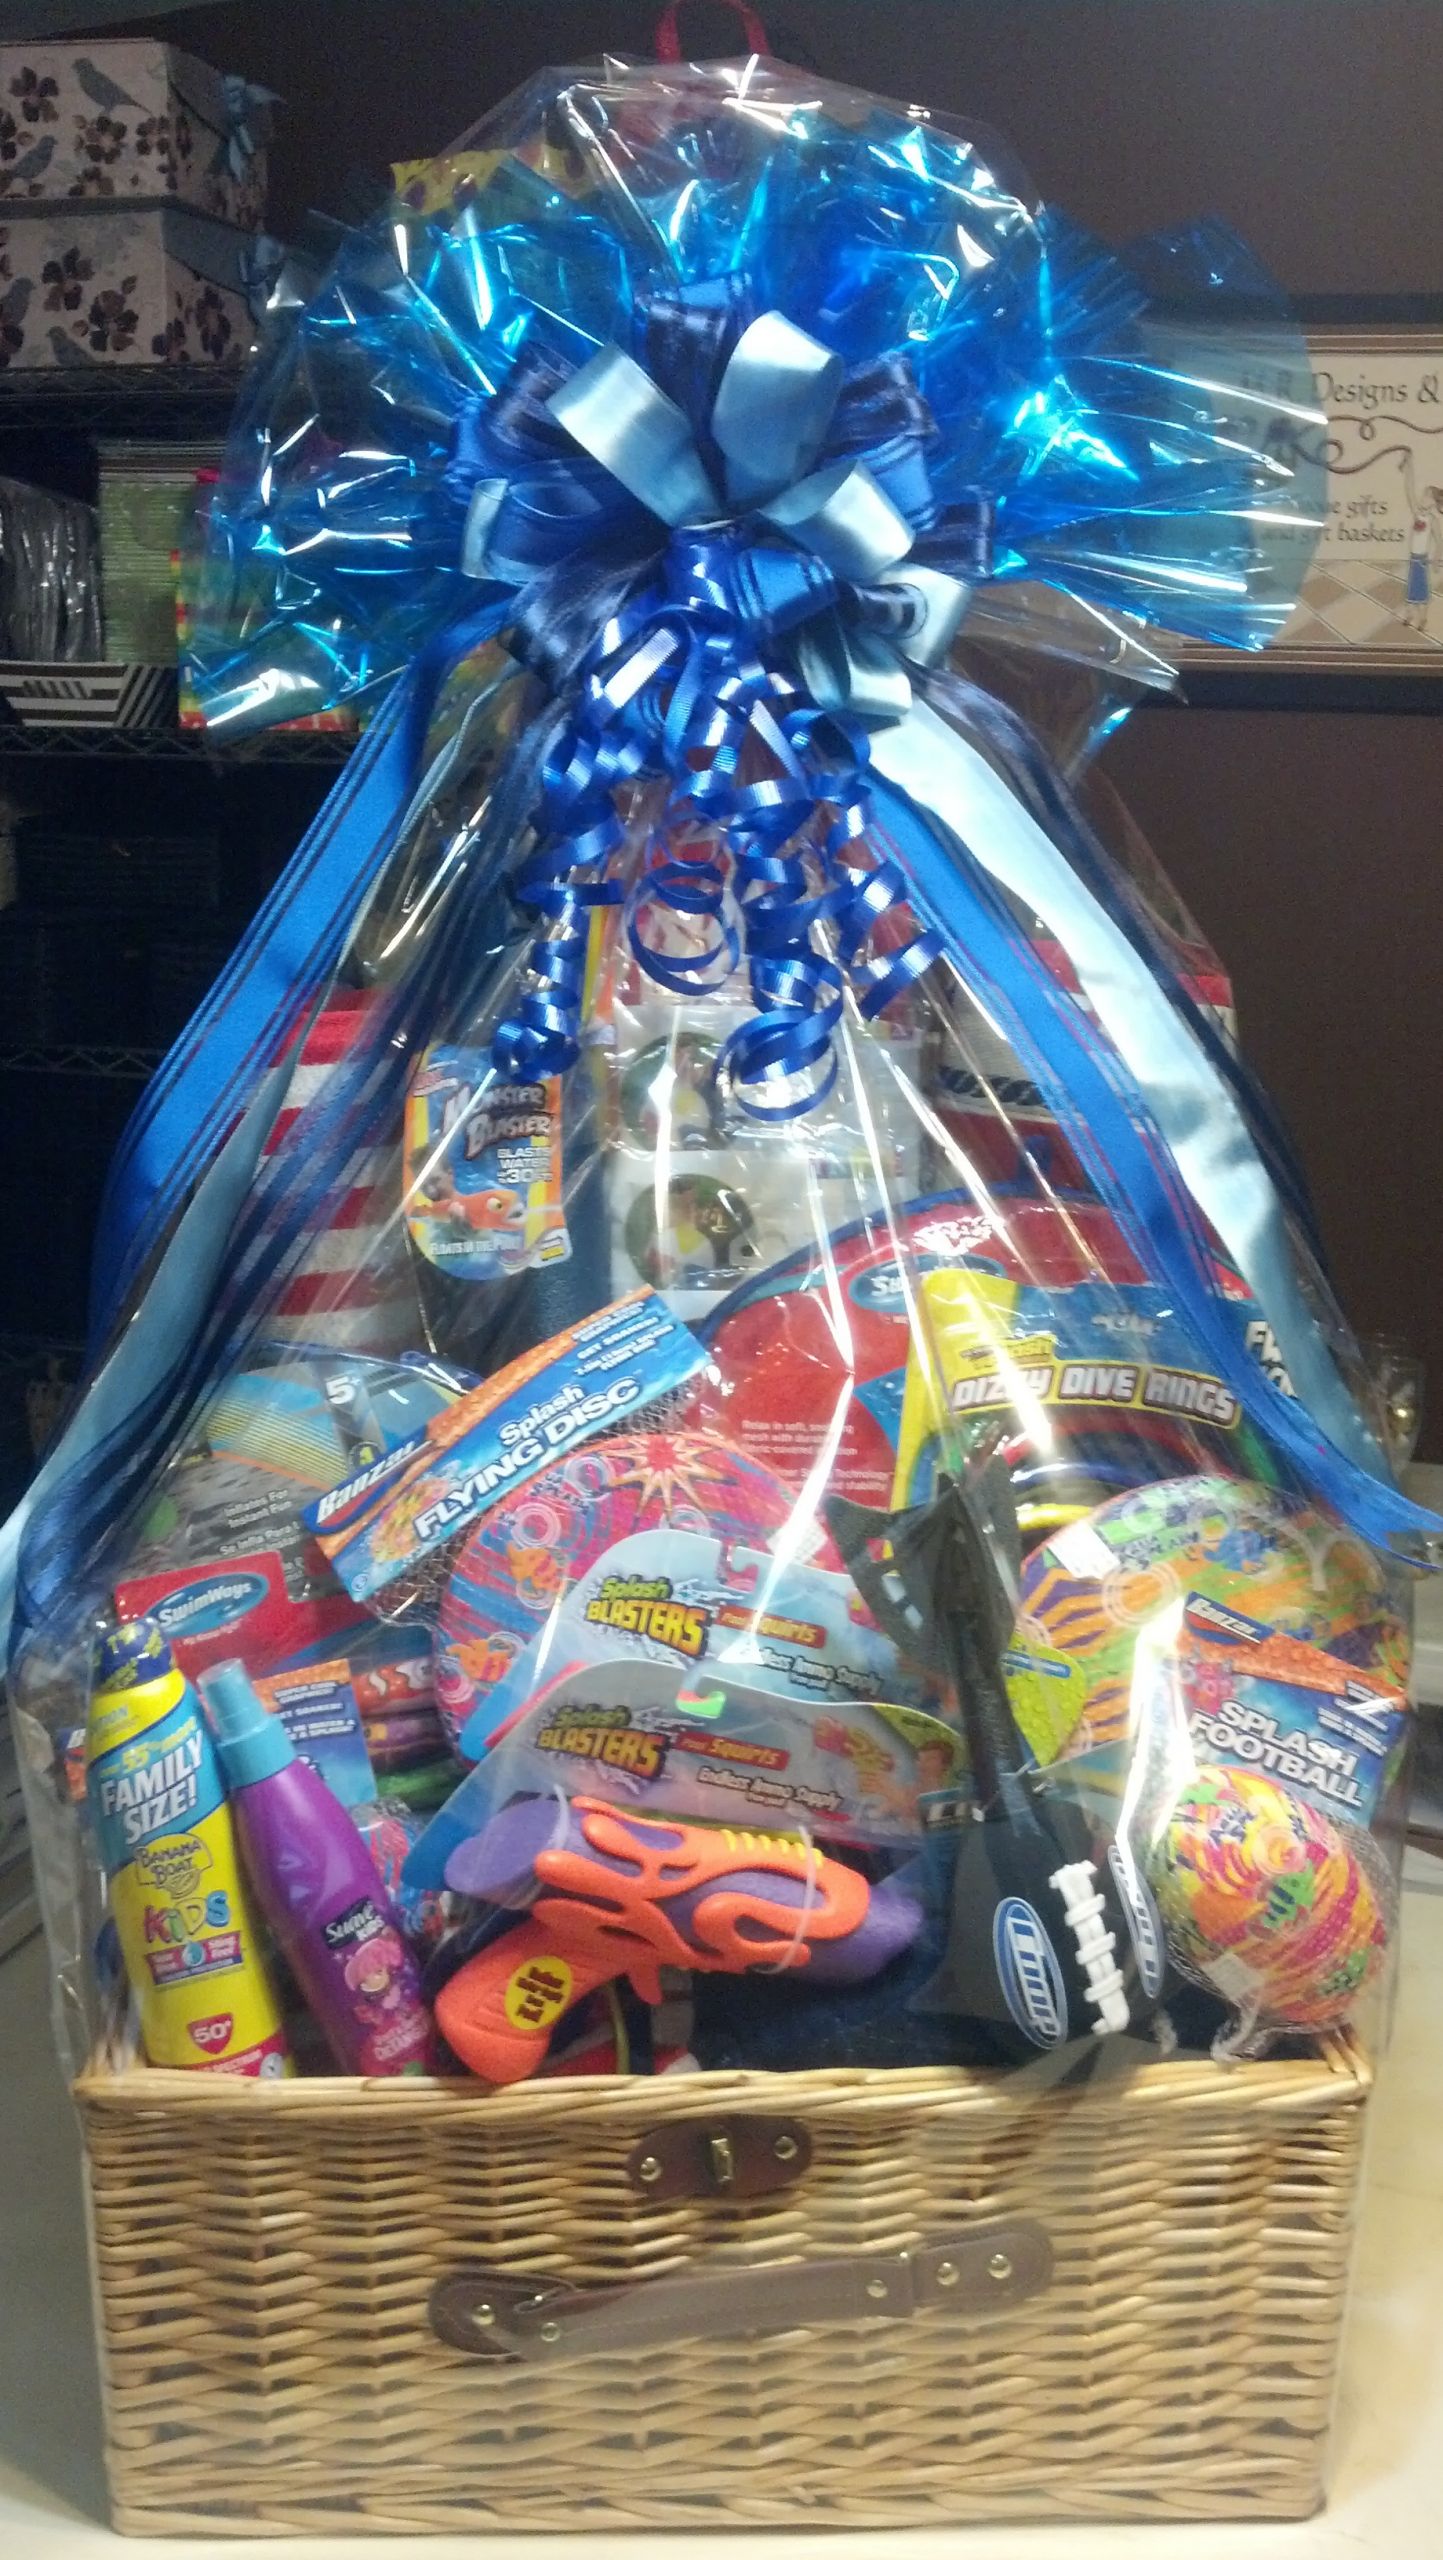 Gift Baskets For Raffle Ideas
 Special Event and Silent Auction Gift Basket Ideas by M R